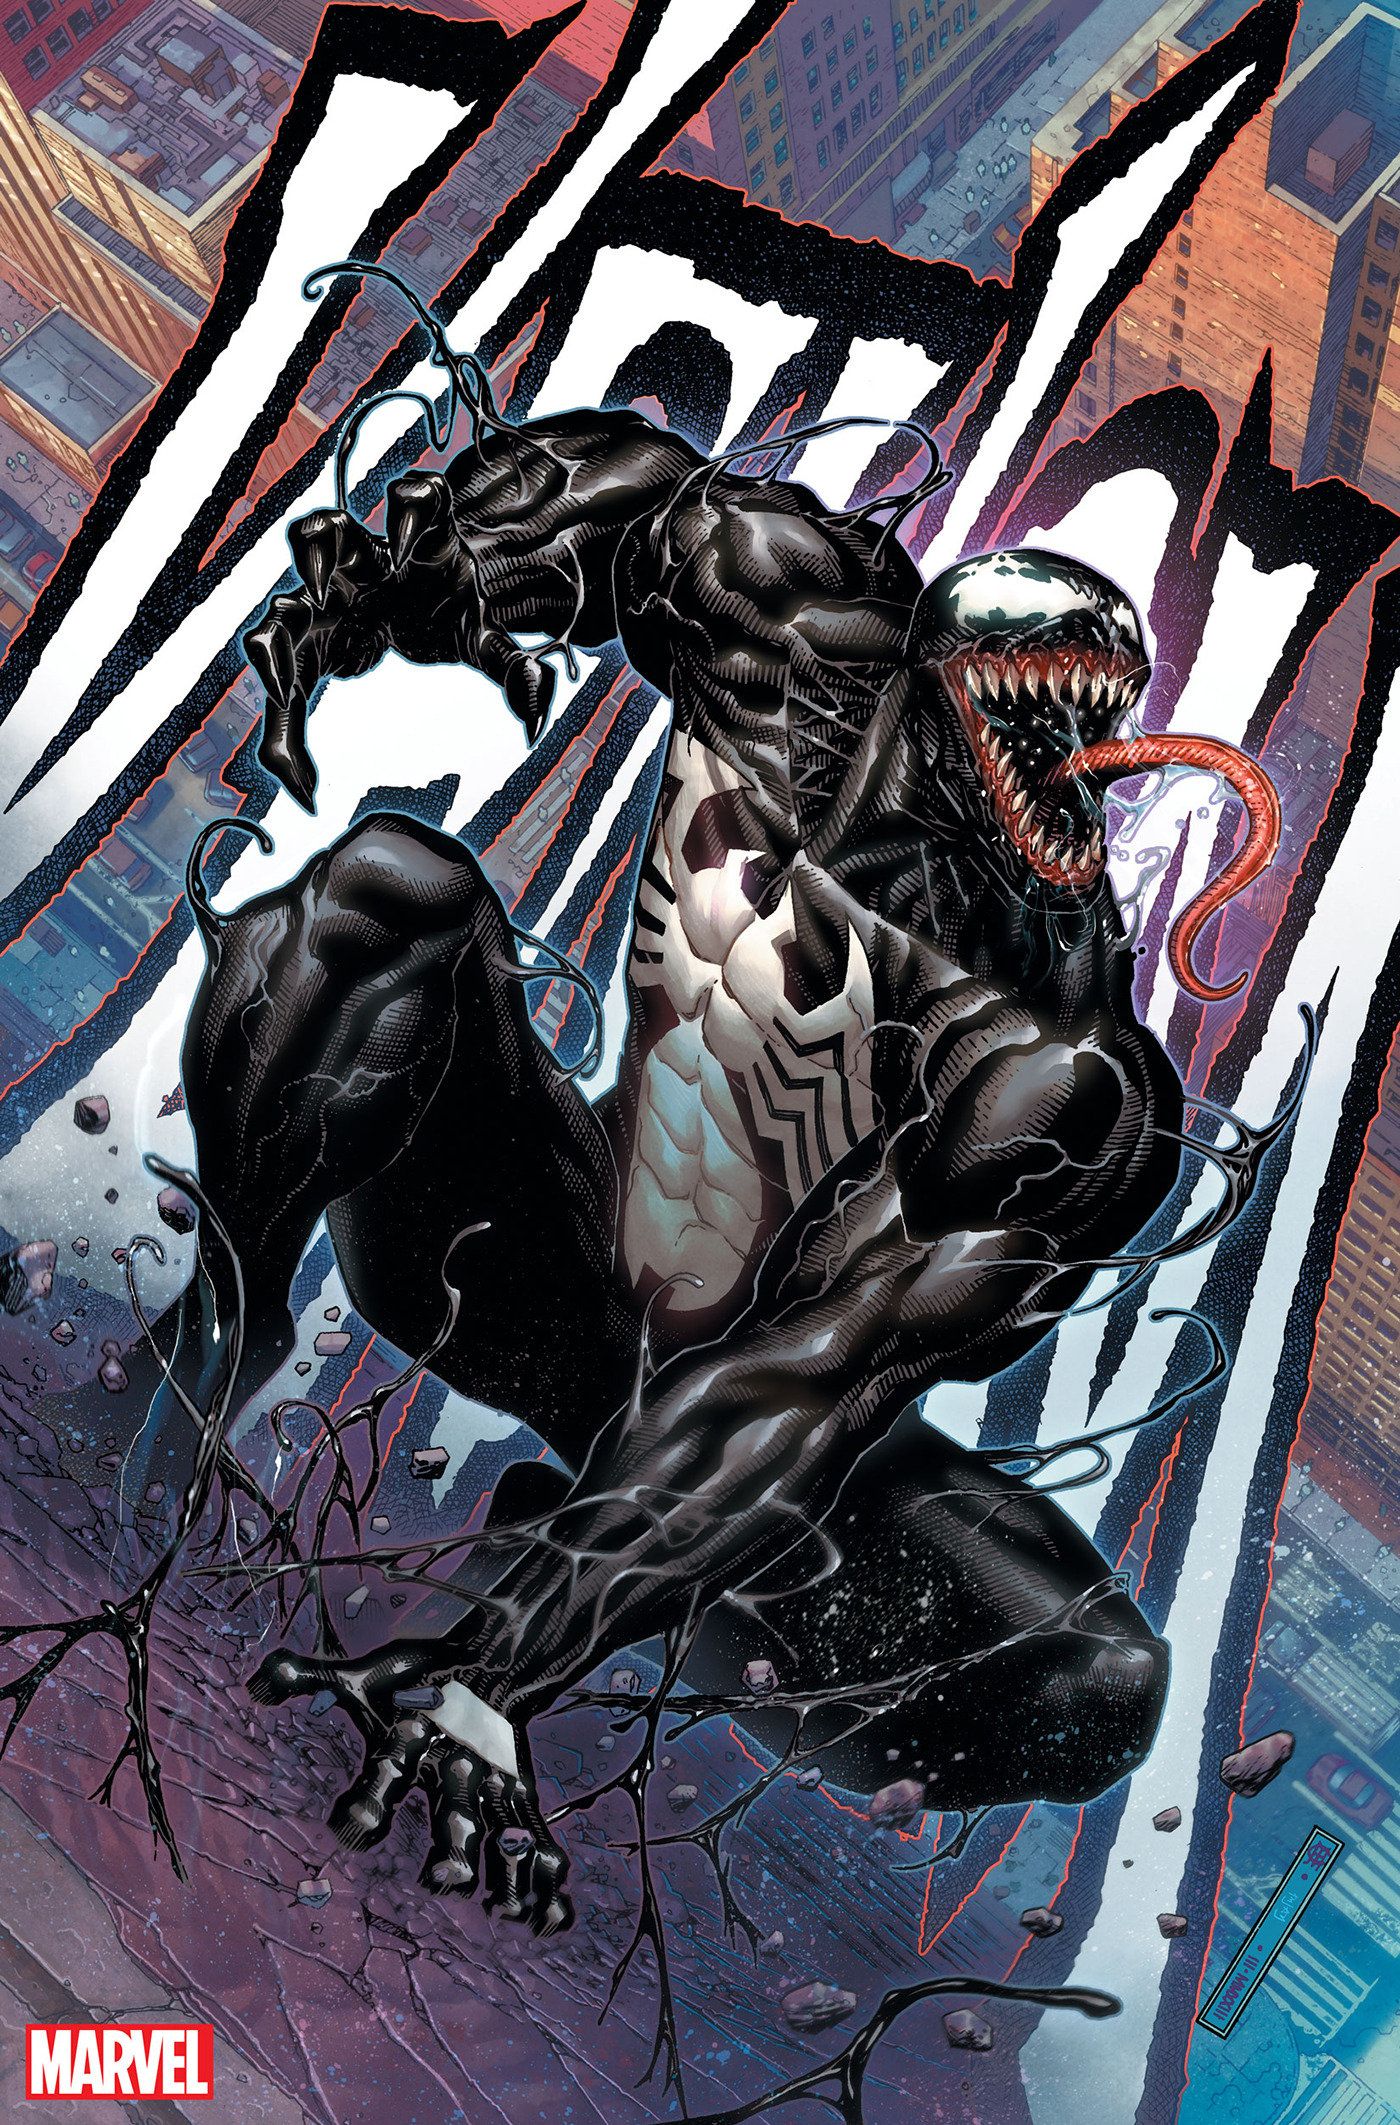 Venom #23 Jim Cheung 1 for 50 Incentive Variant